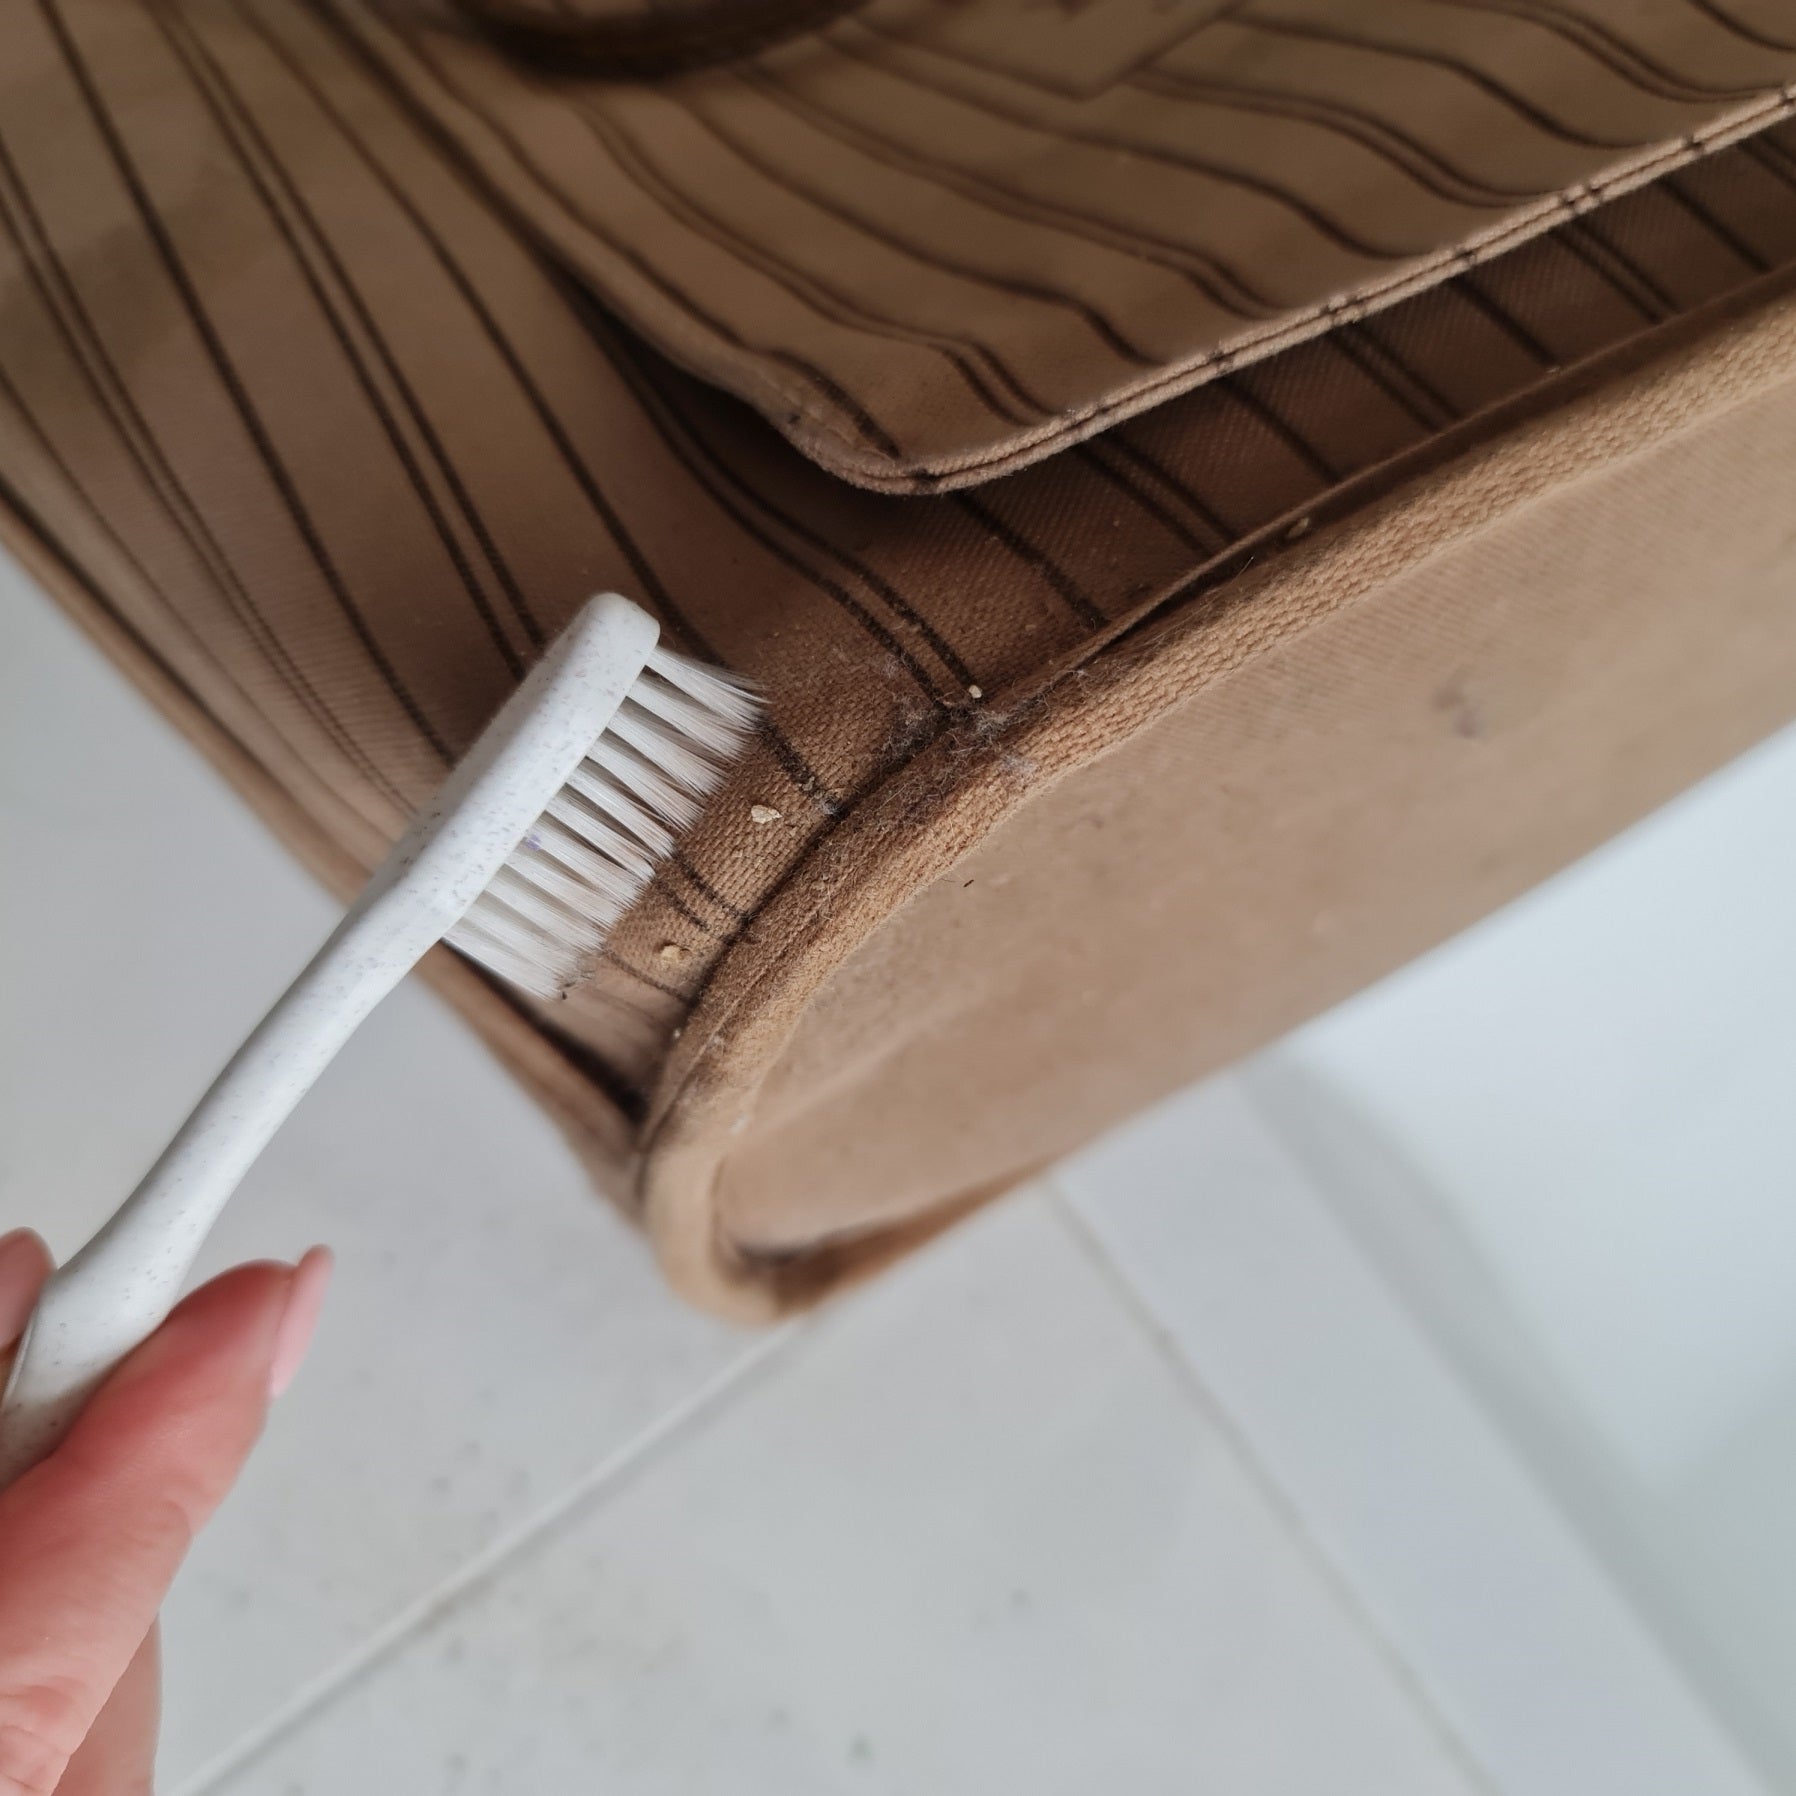 How to Clean The Inside Lining of Your Louis Vuitton Bag At Home – Bagaholic